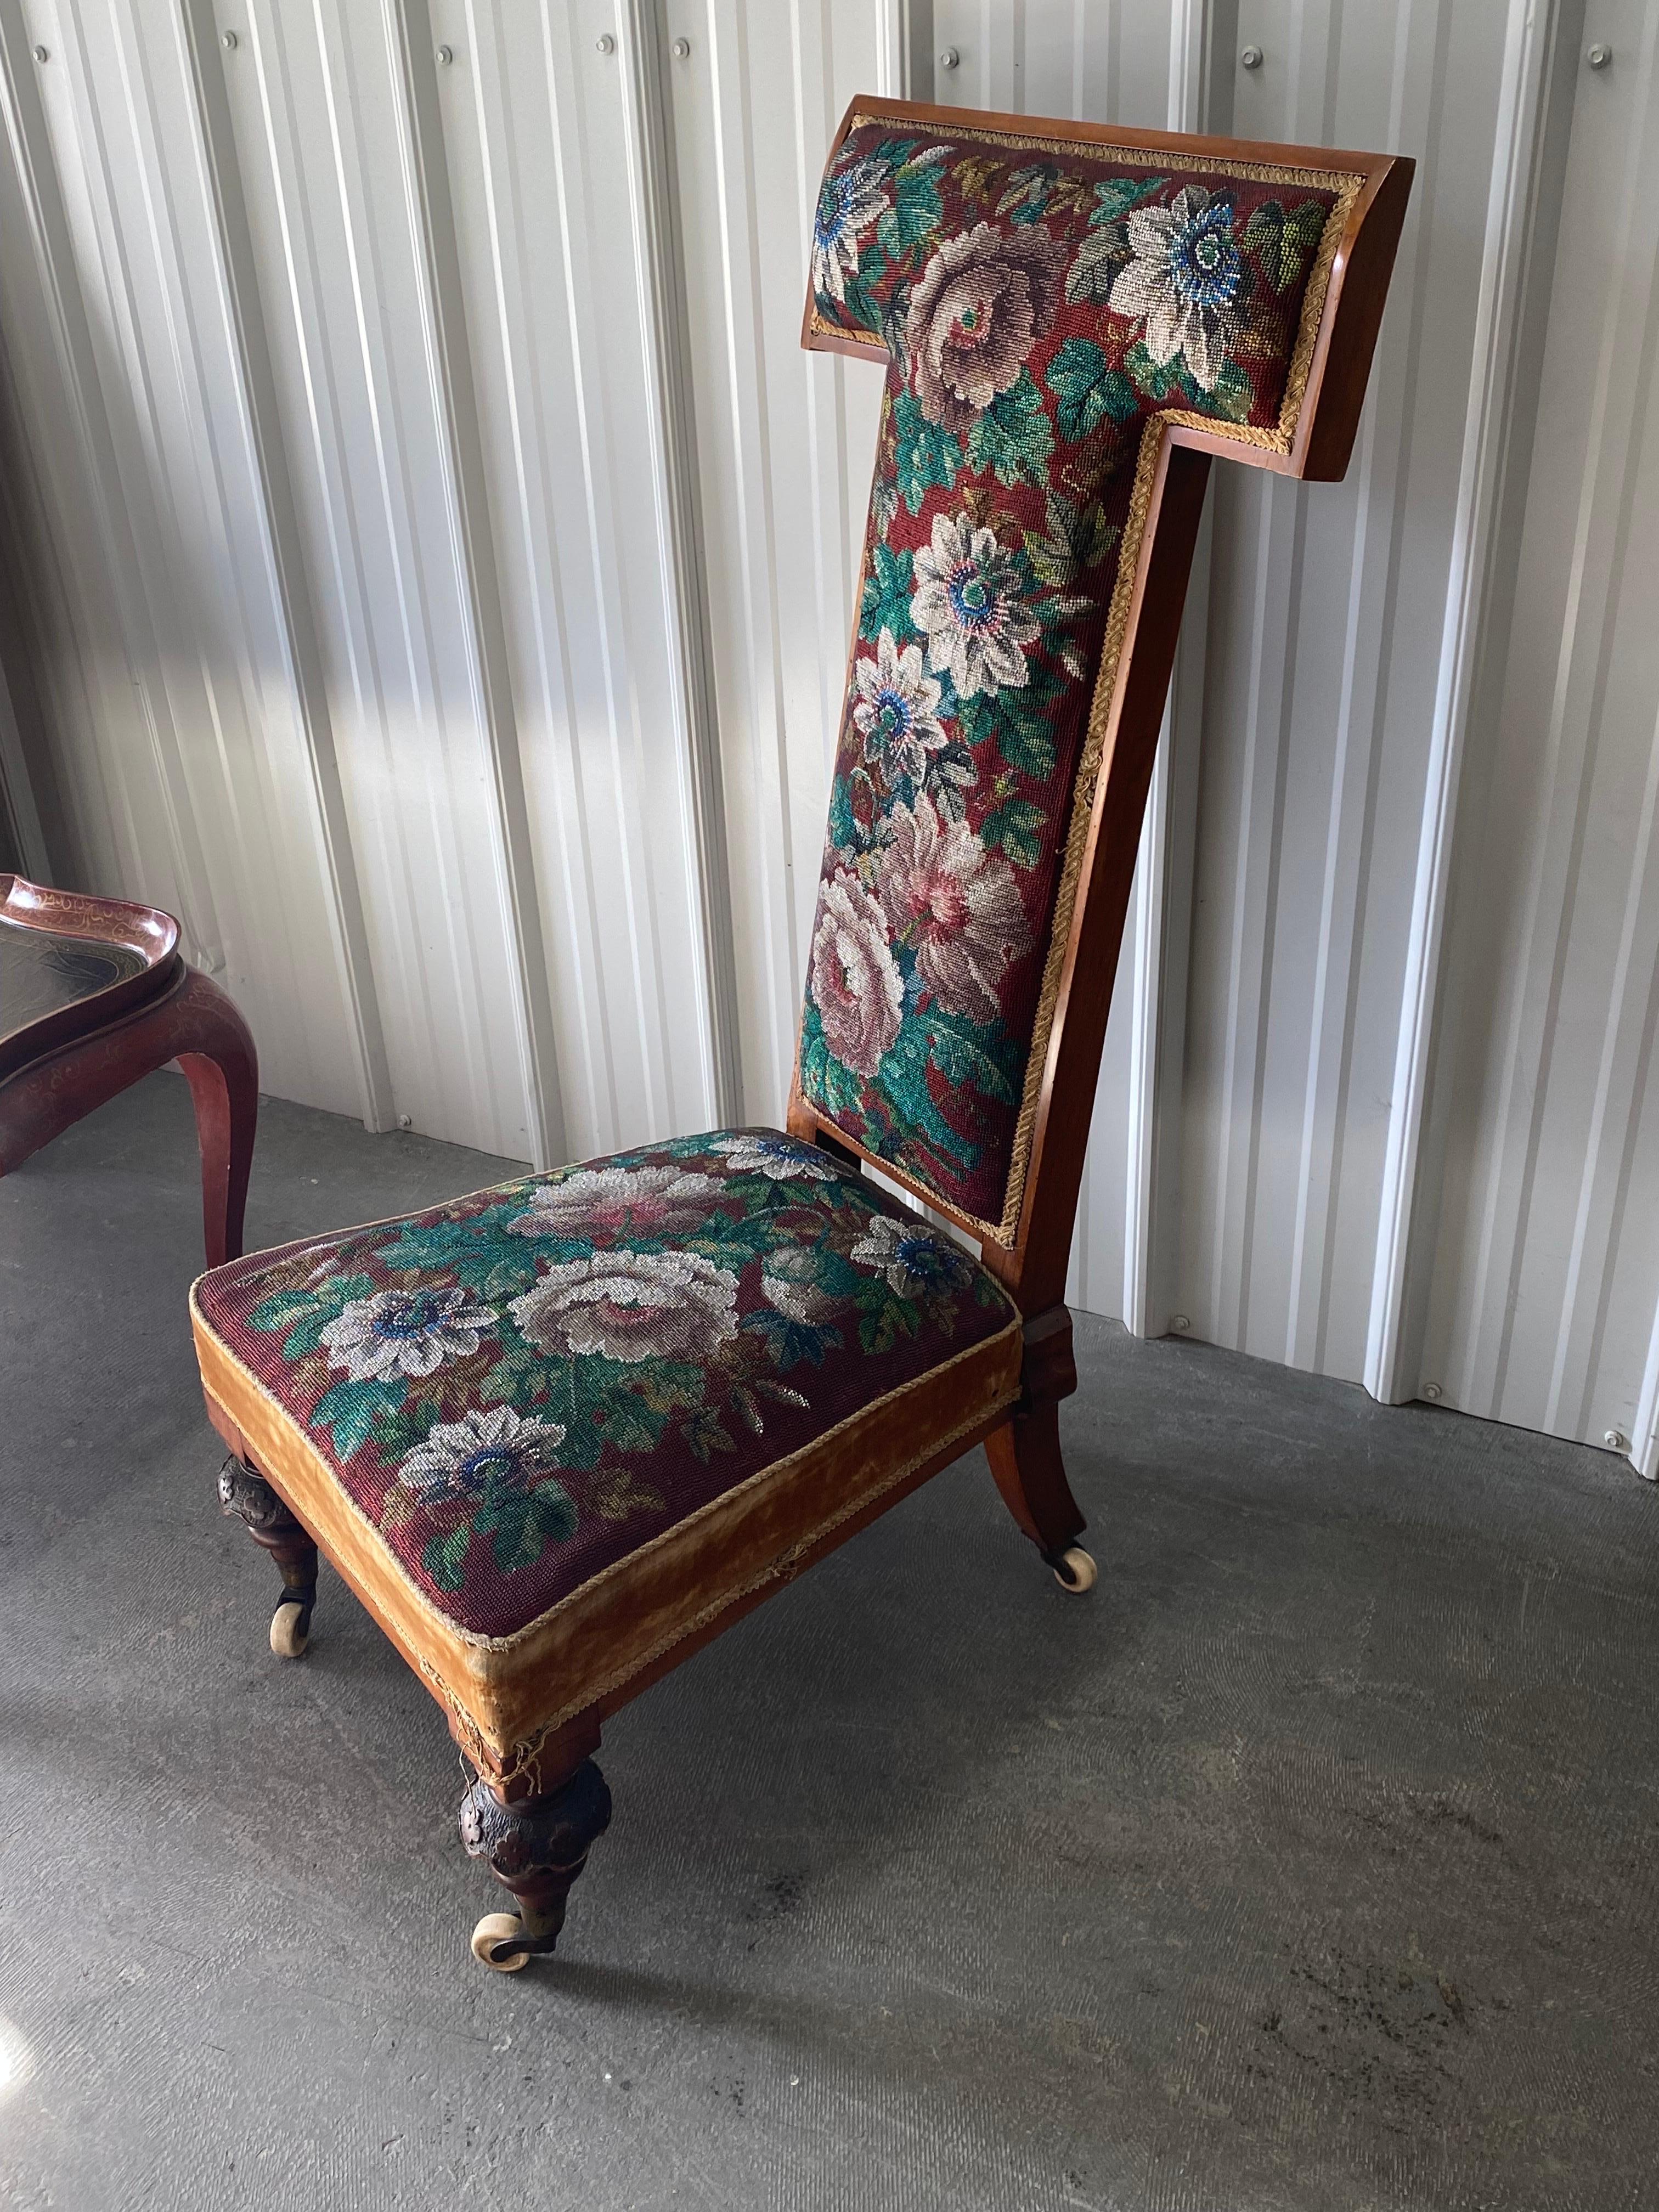 A French 19th C. Prie Dieu or Prayer Chair with Hand-Embroidered Beaded Upholstery. 
A high wooden frame back to kneel on and stablize the arms. Stunning hand-embroidered floral beaded seat and back. Contrasting caramel velvet and trim around edges